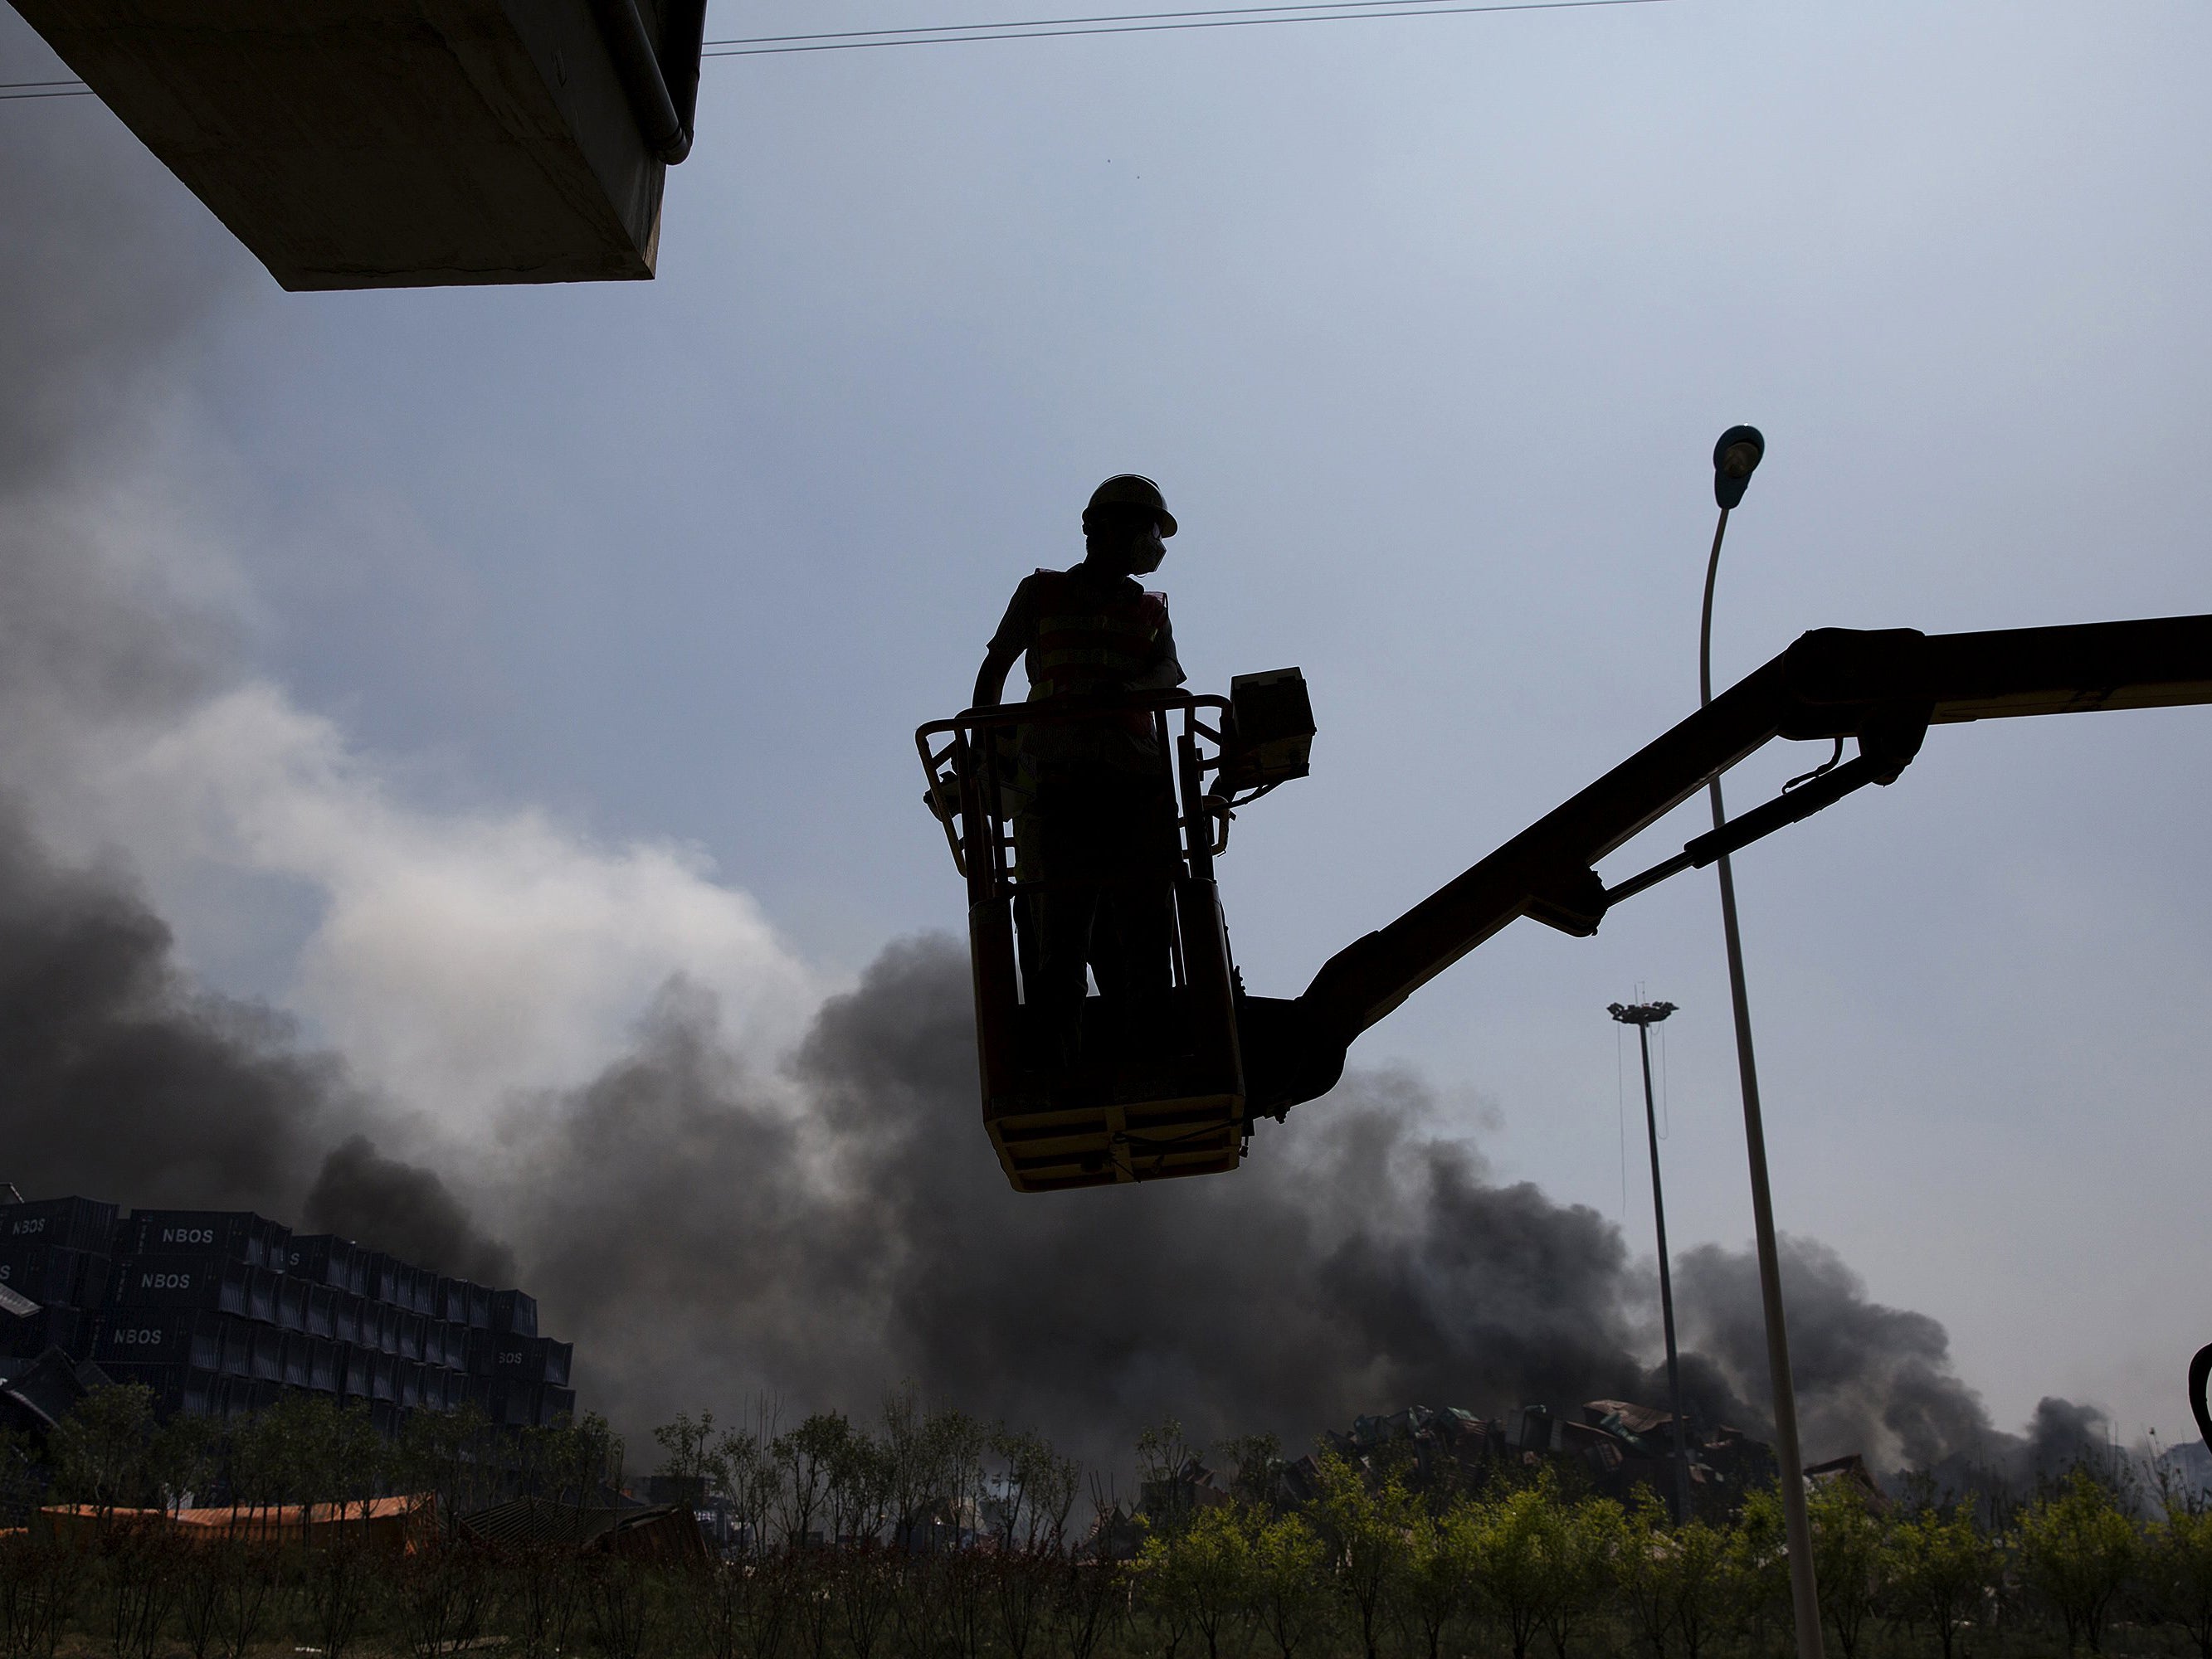 A emergency worker is lifted by a crane as smokes plumes from the explosion site in Binhai new district in Tianjin